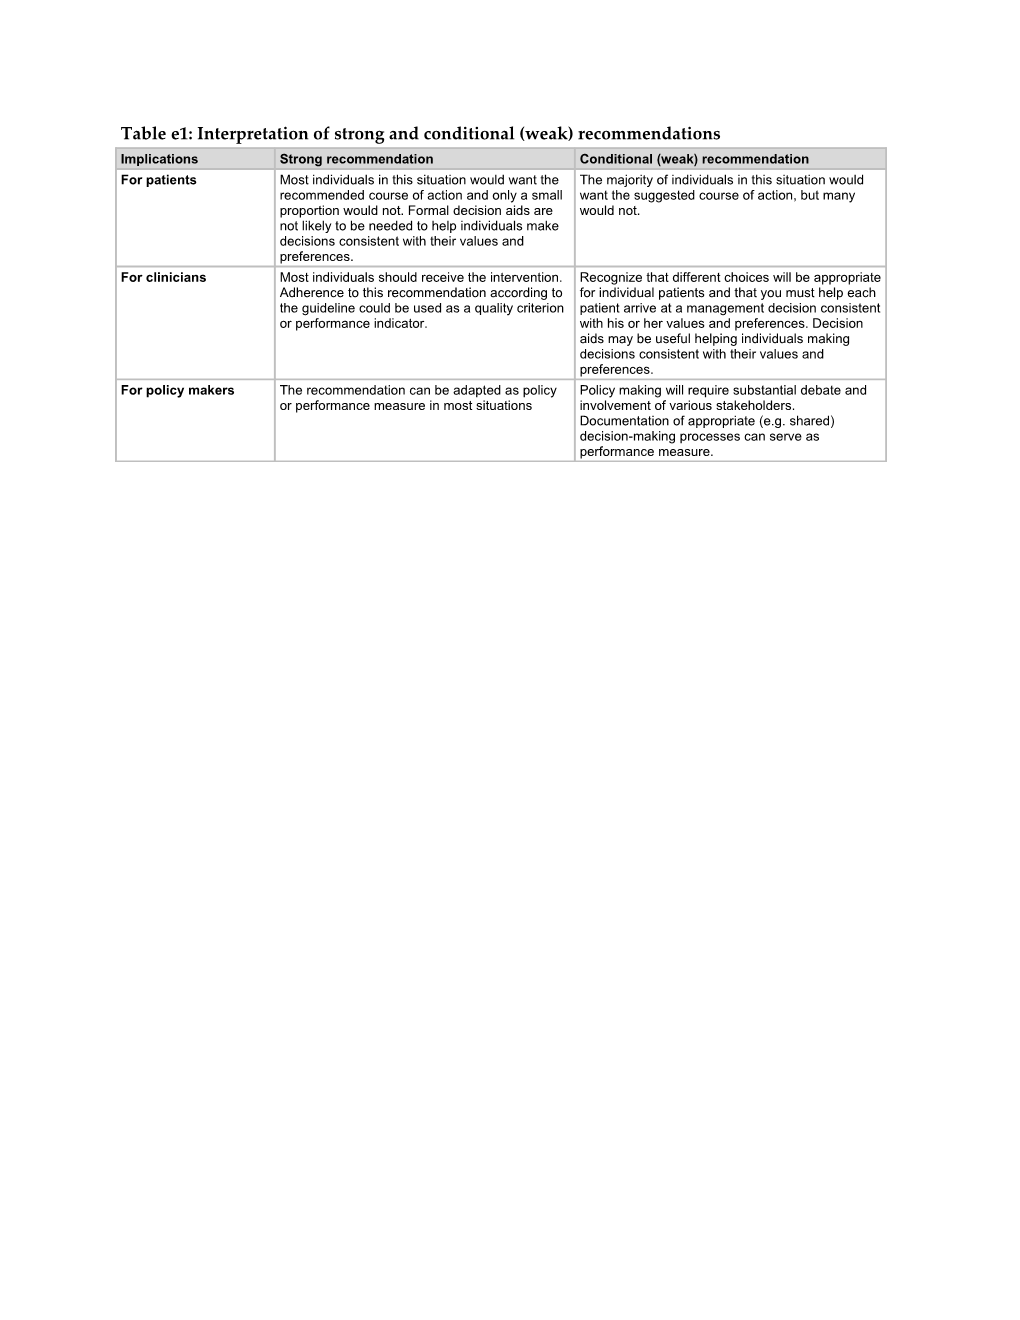 Table E1: Interpretation of Strong and Conditional (Weak) Recommendations